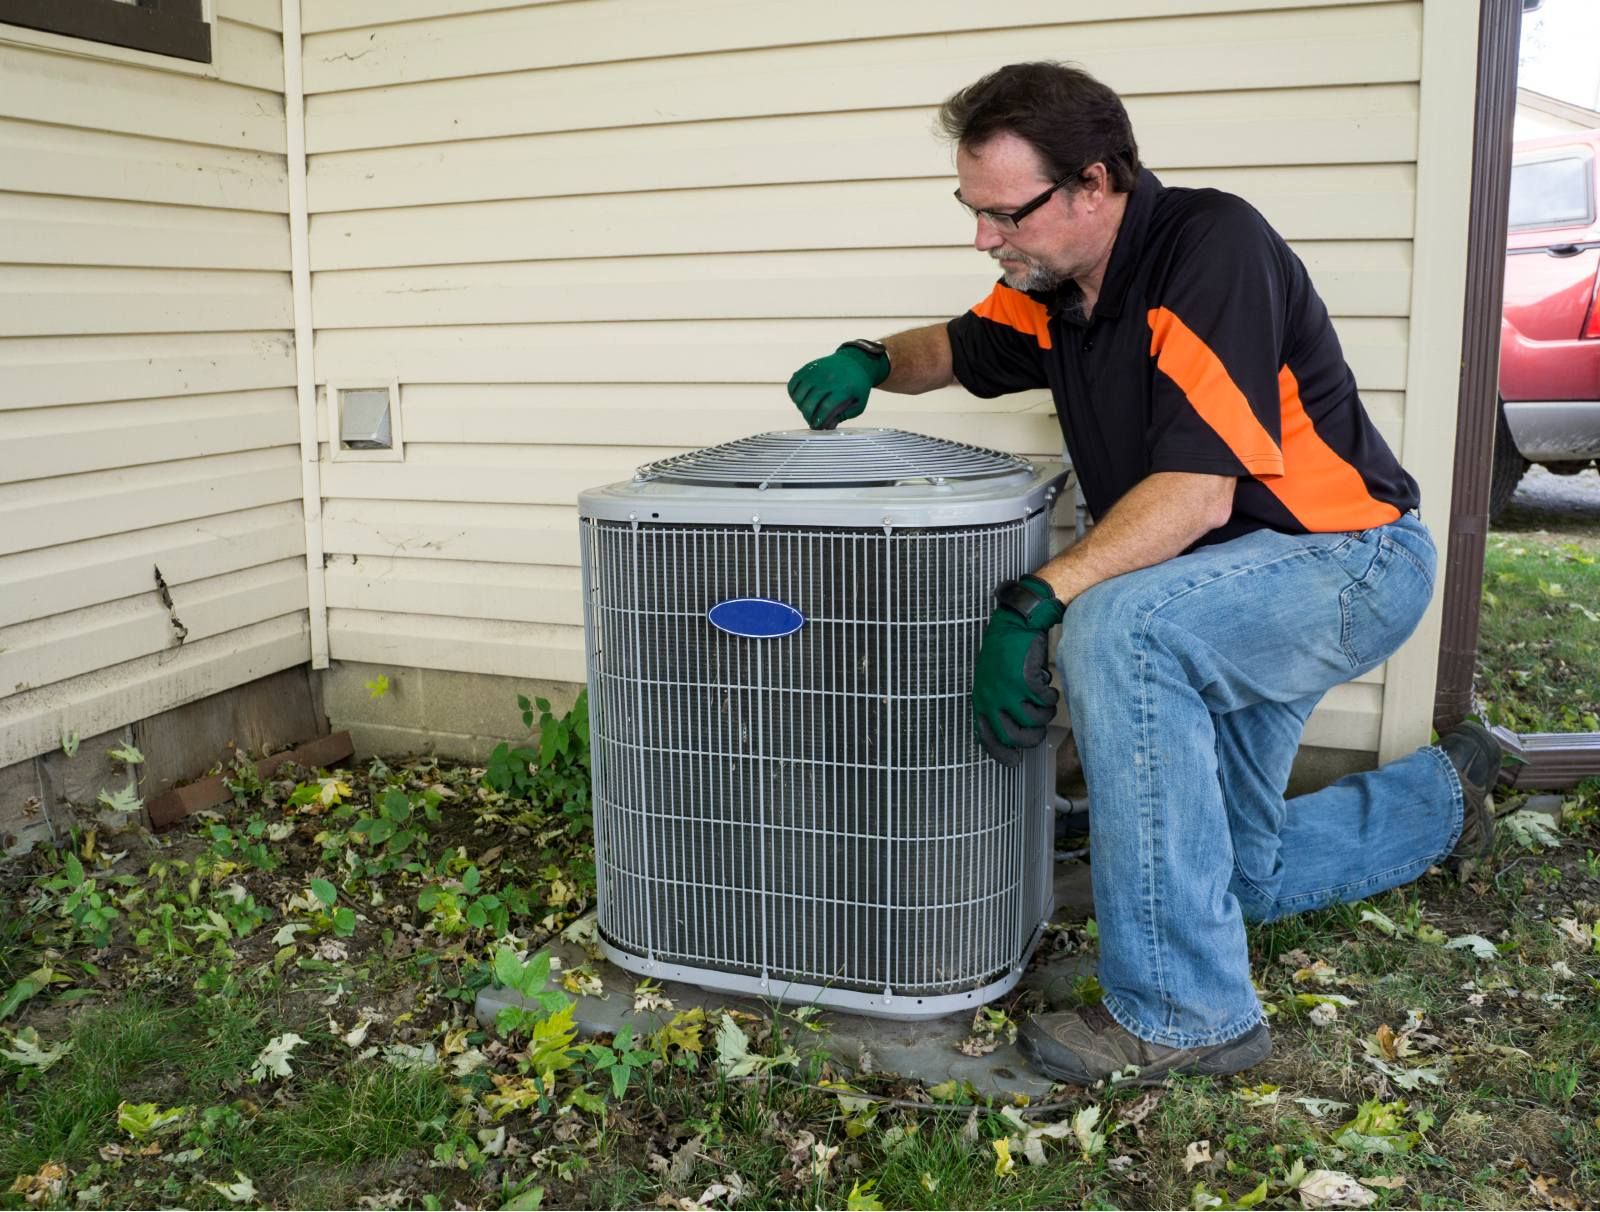 A repair technician works on an air-conditioning unit outside a house - landmark home warranty